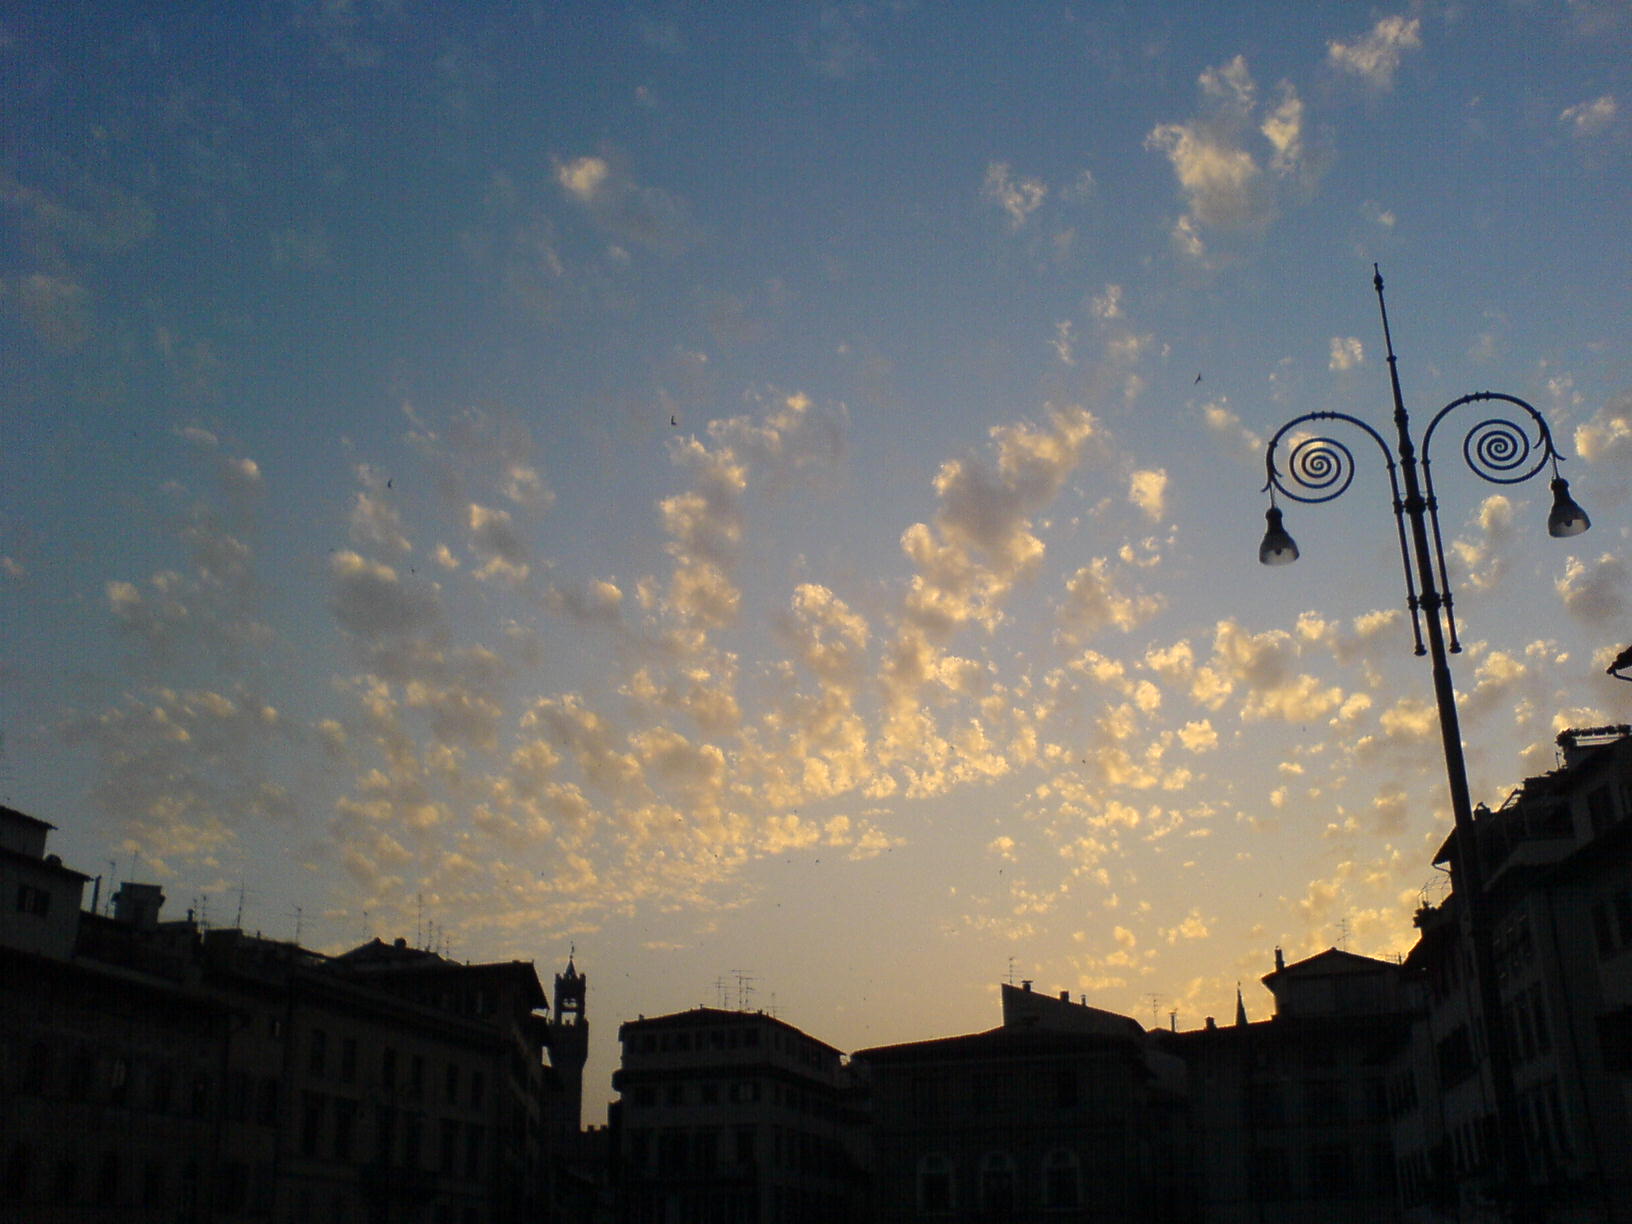 Evening sky over Piazza Santa Croce, Florence